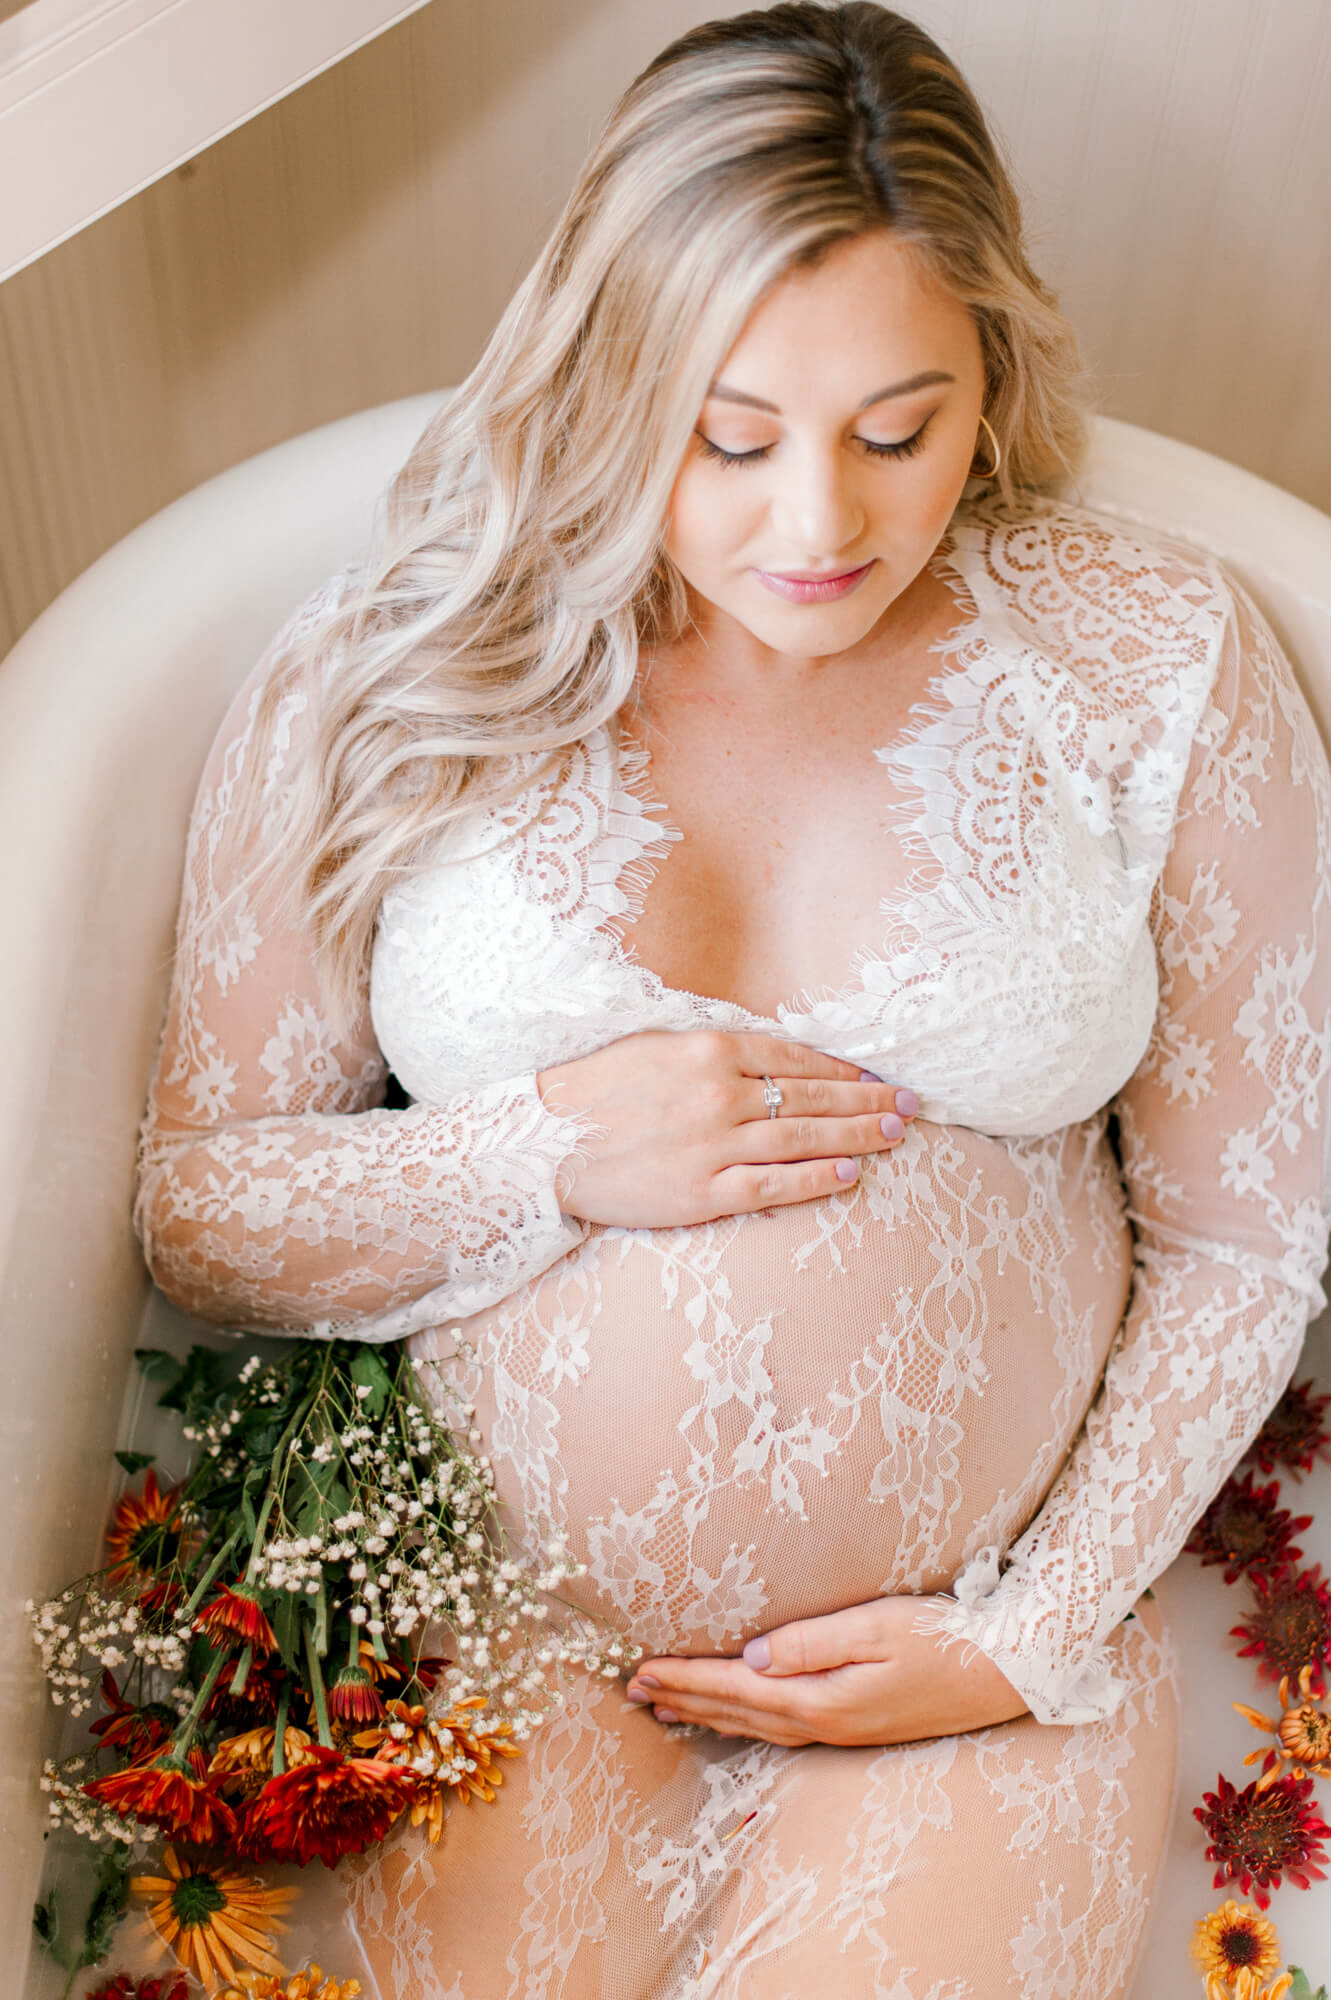 Pregnant mama in lace dress sits in a milk bath holding her belly and looking down toward her babygirl 